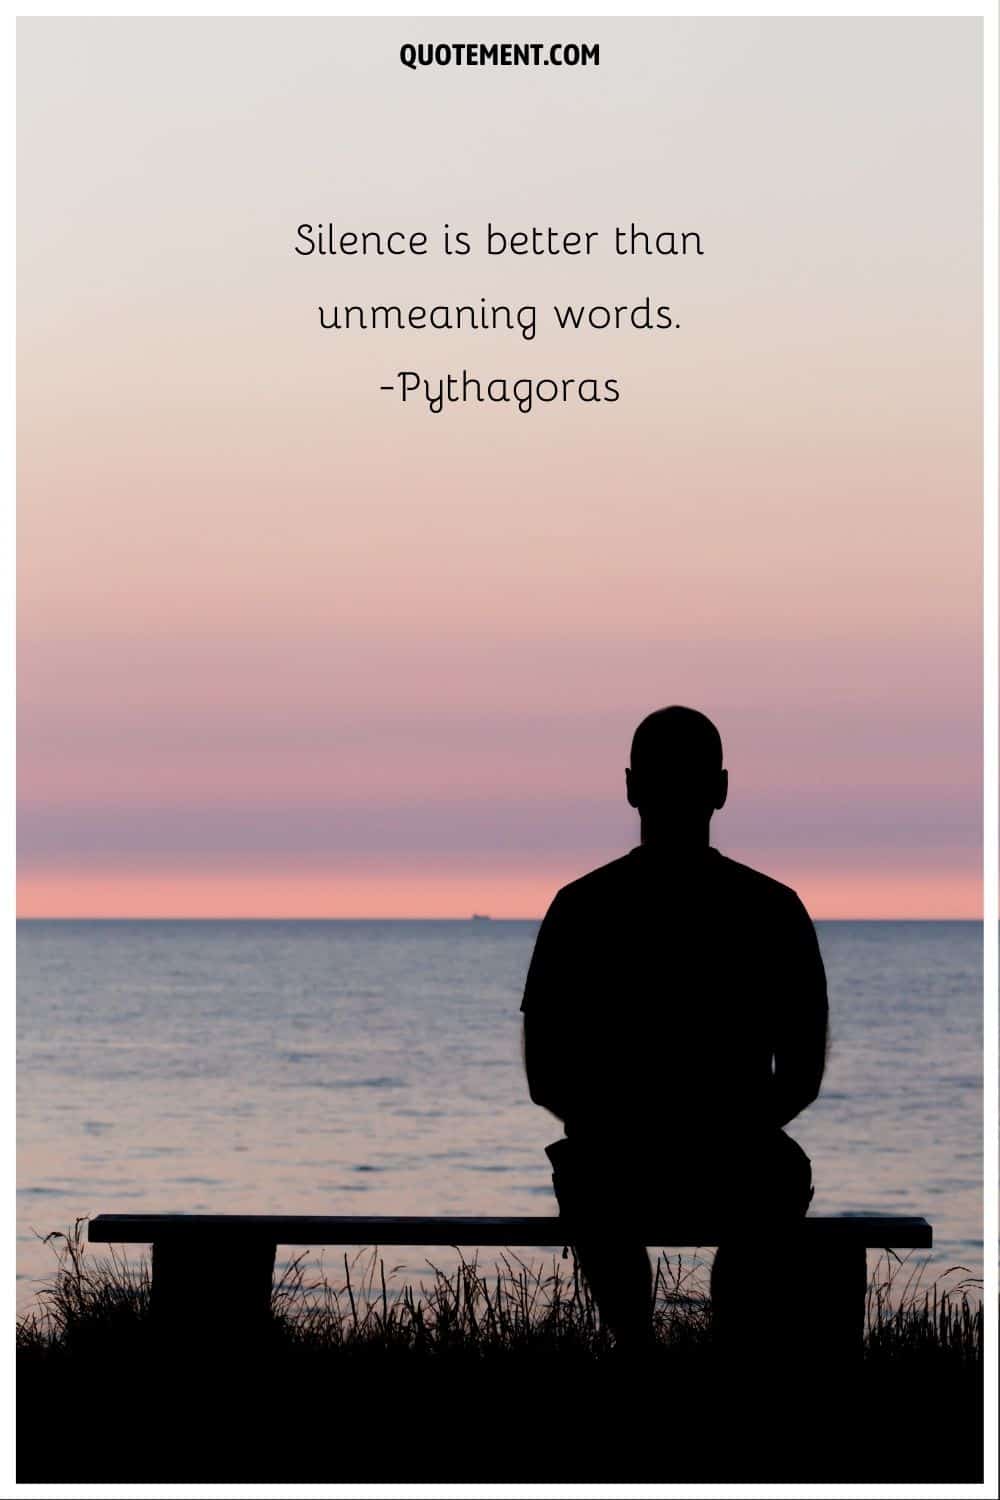 “Silence is better than unmeaning words.” ― Pythagoras